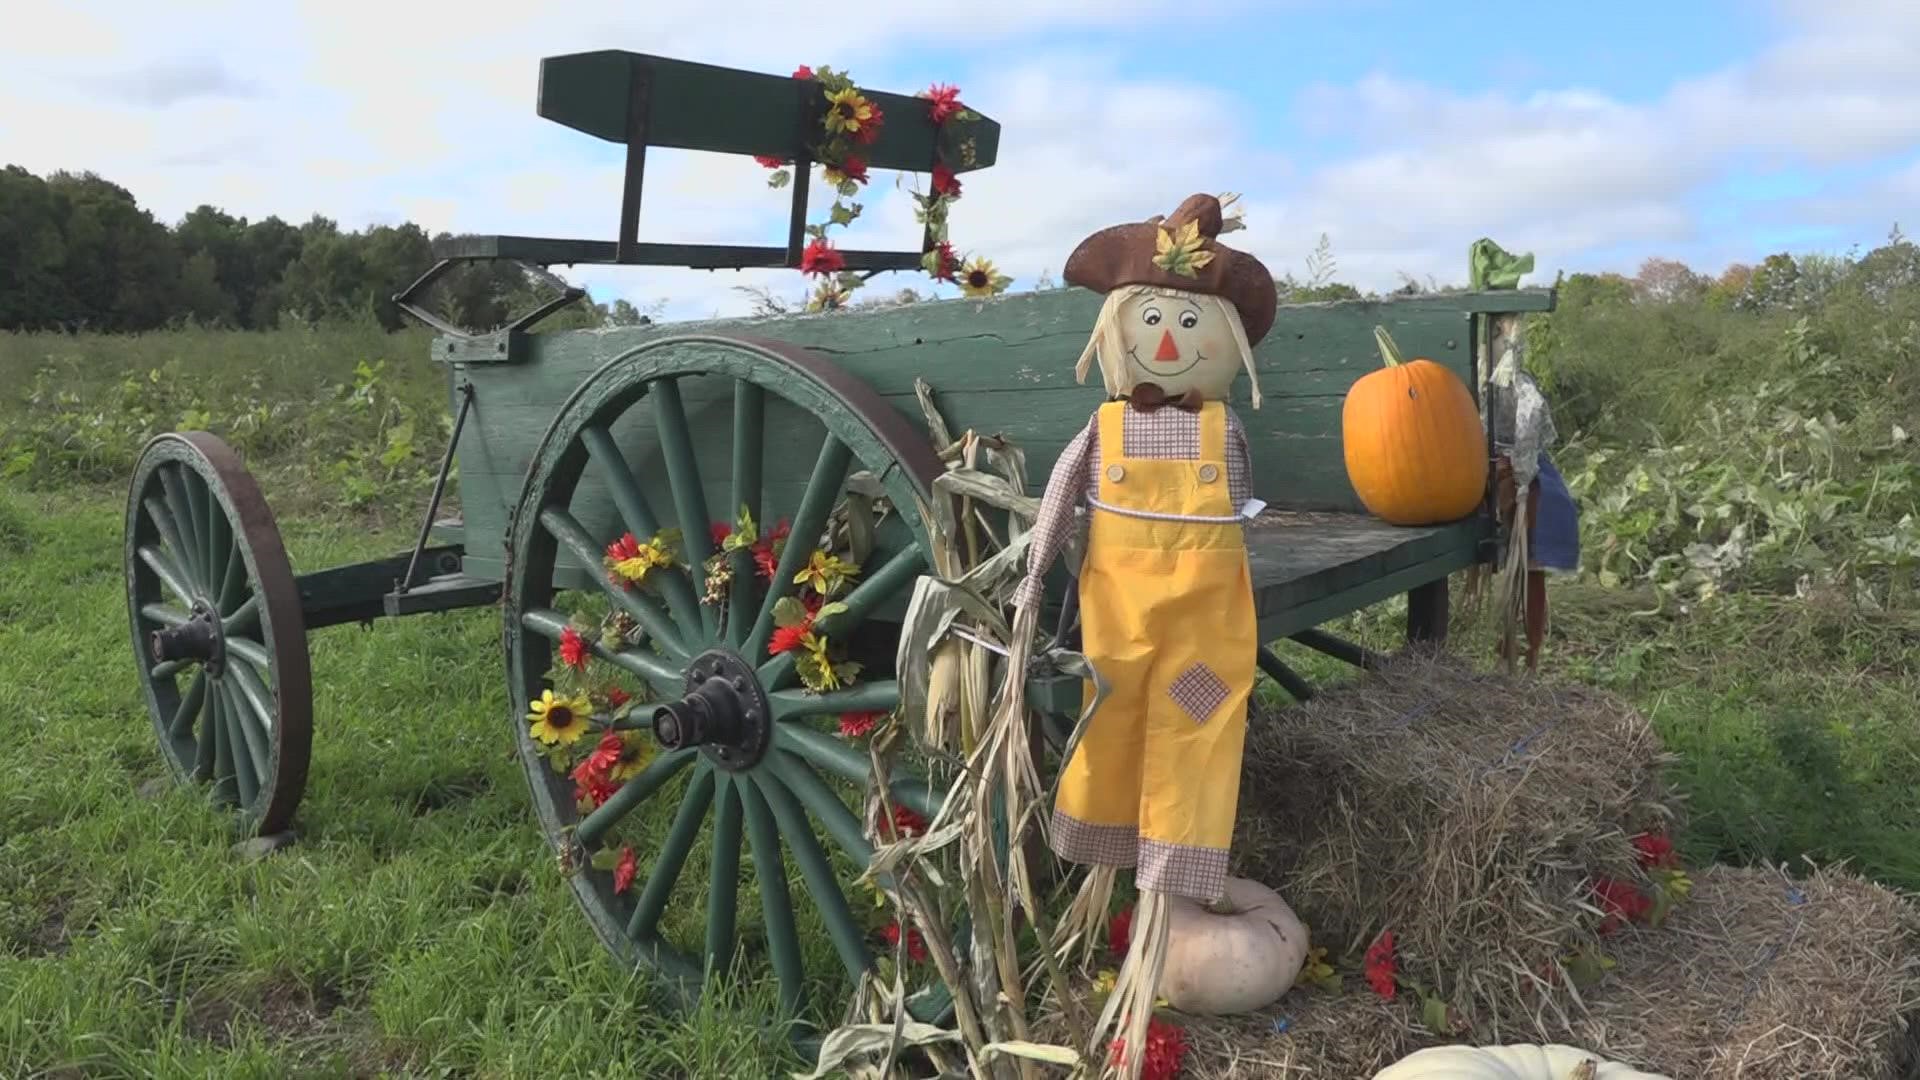 As folks flock to pick apples and pumpkins, fall festivities may look a little different this year.